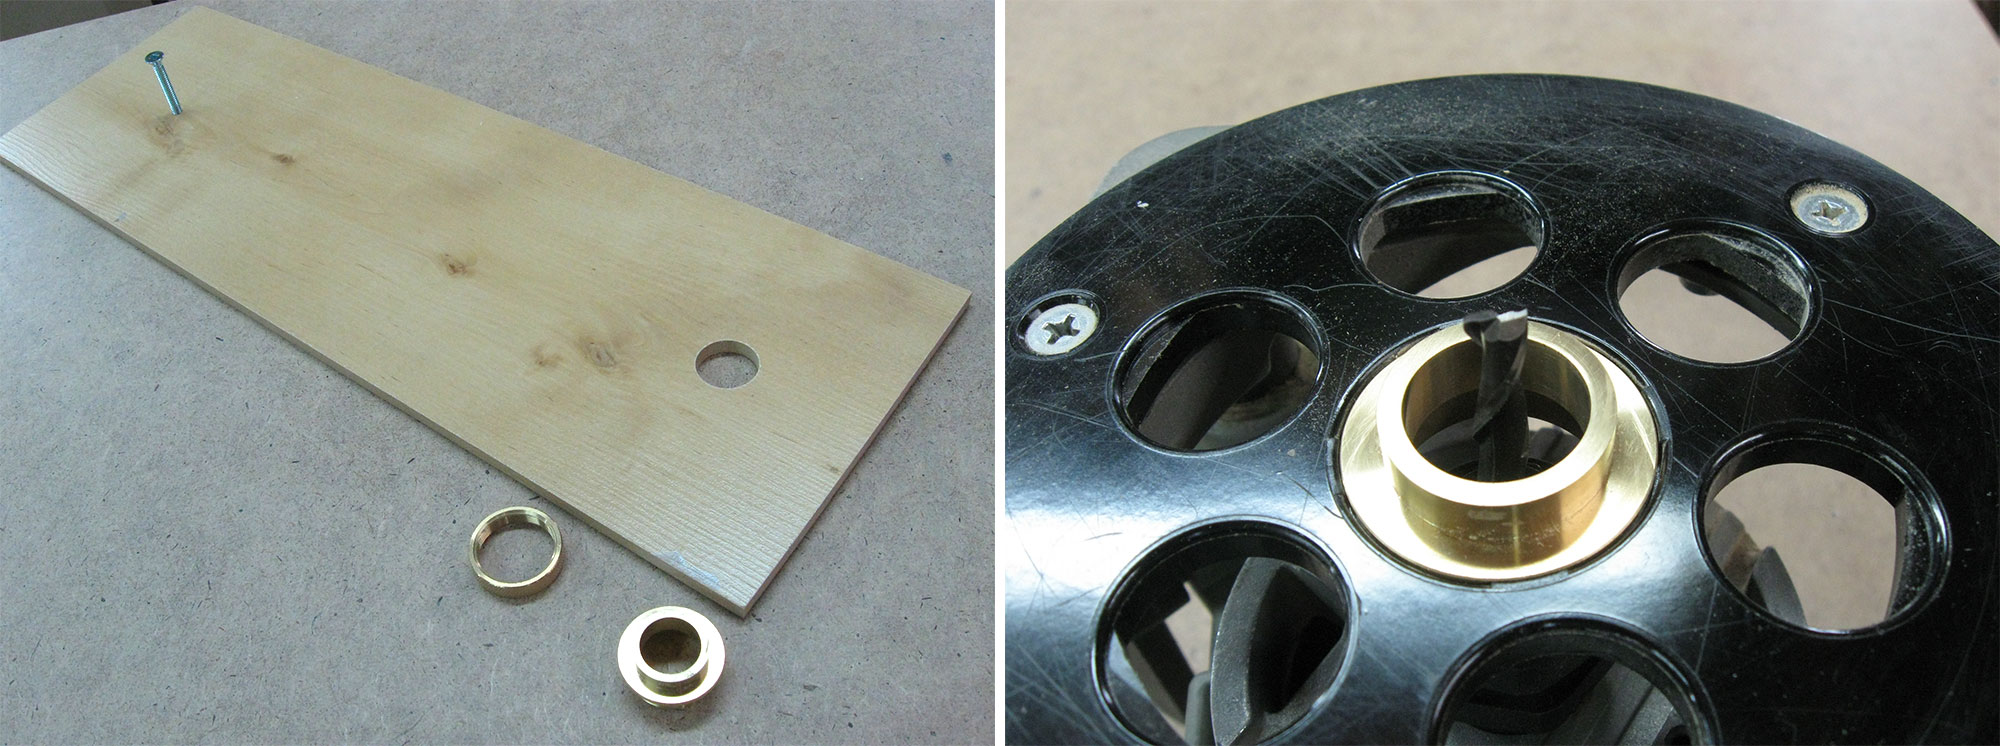 Left: Holes drilled into trammel. Right: 1” guide bushing installed in router baseplate.